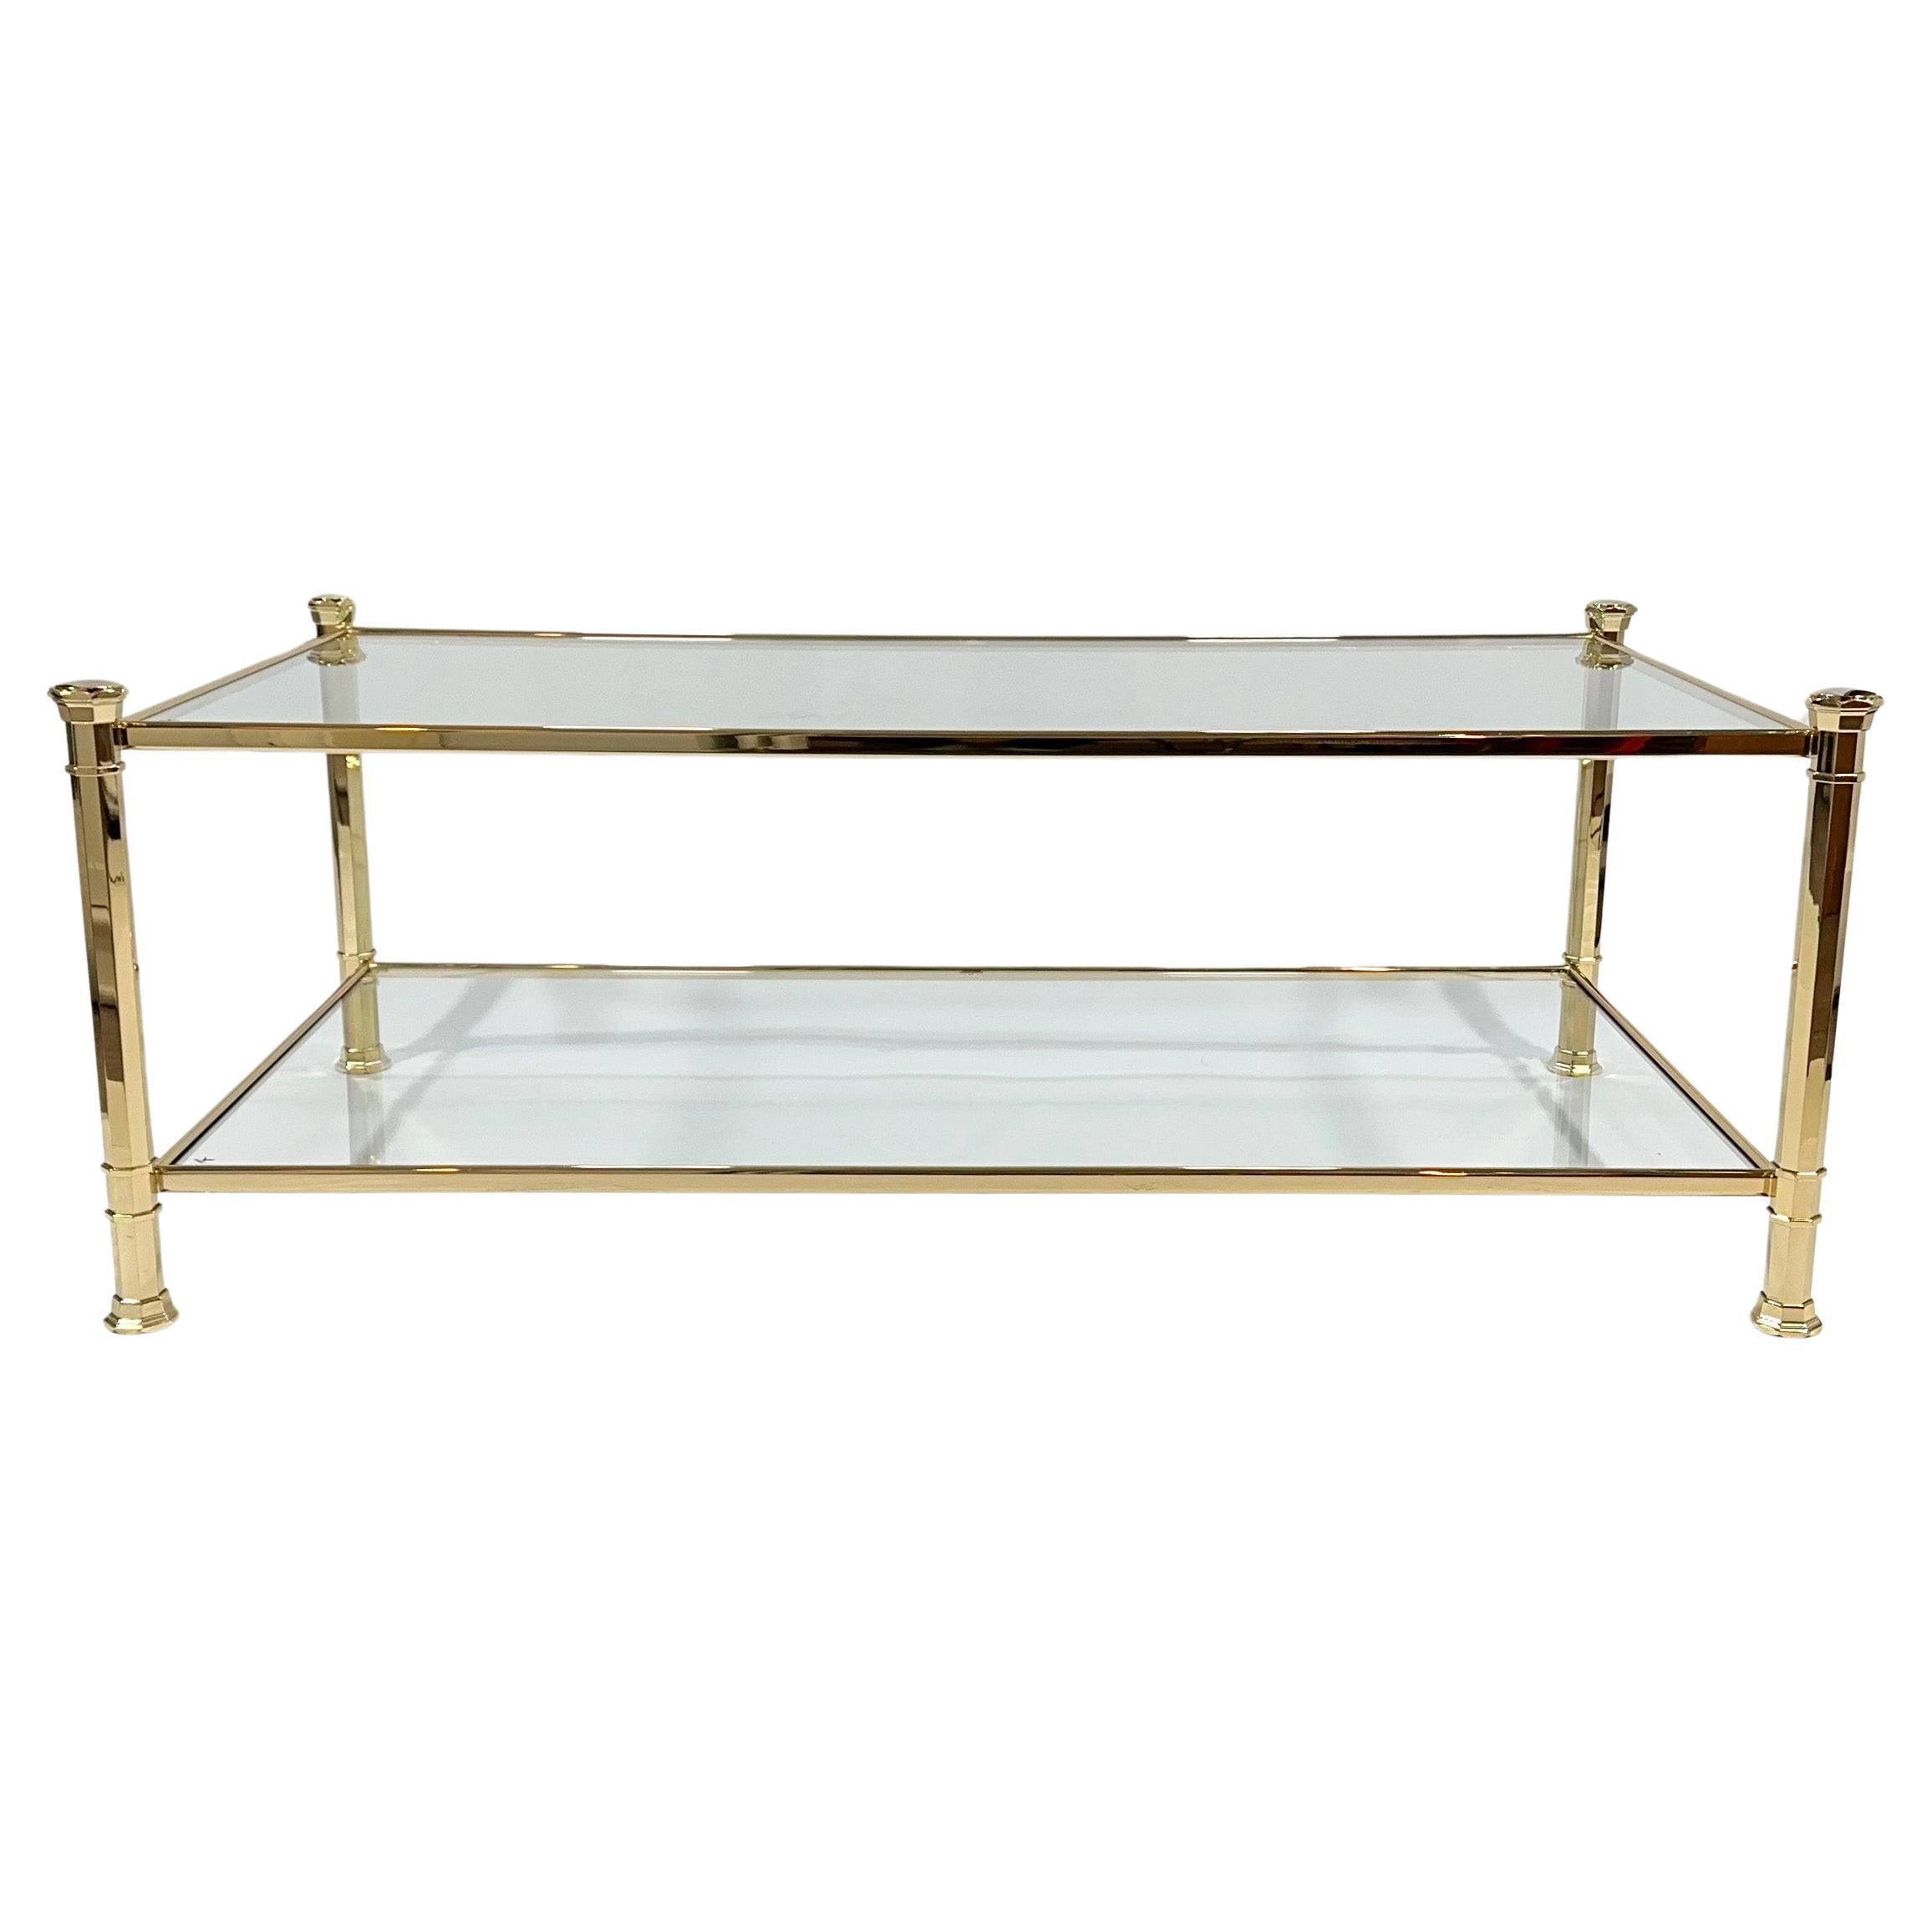 1970s French Brass Coffee Table with Glass Tiers, Neoclassical Influences